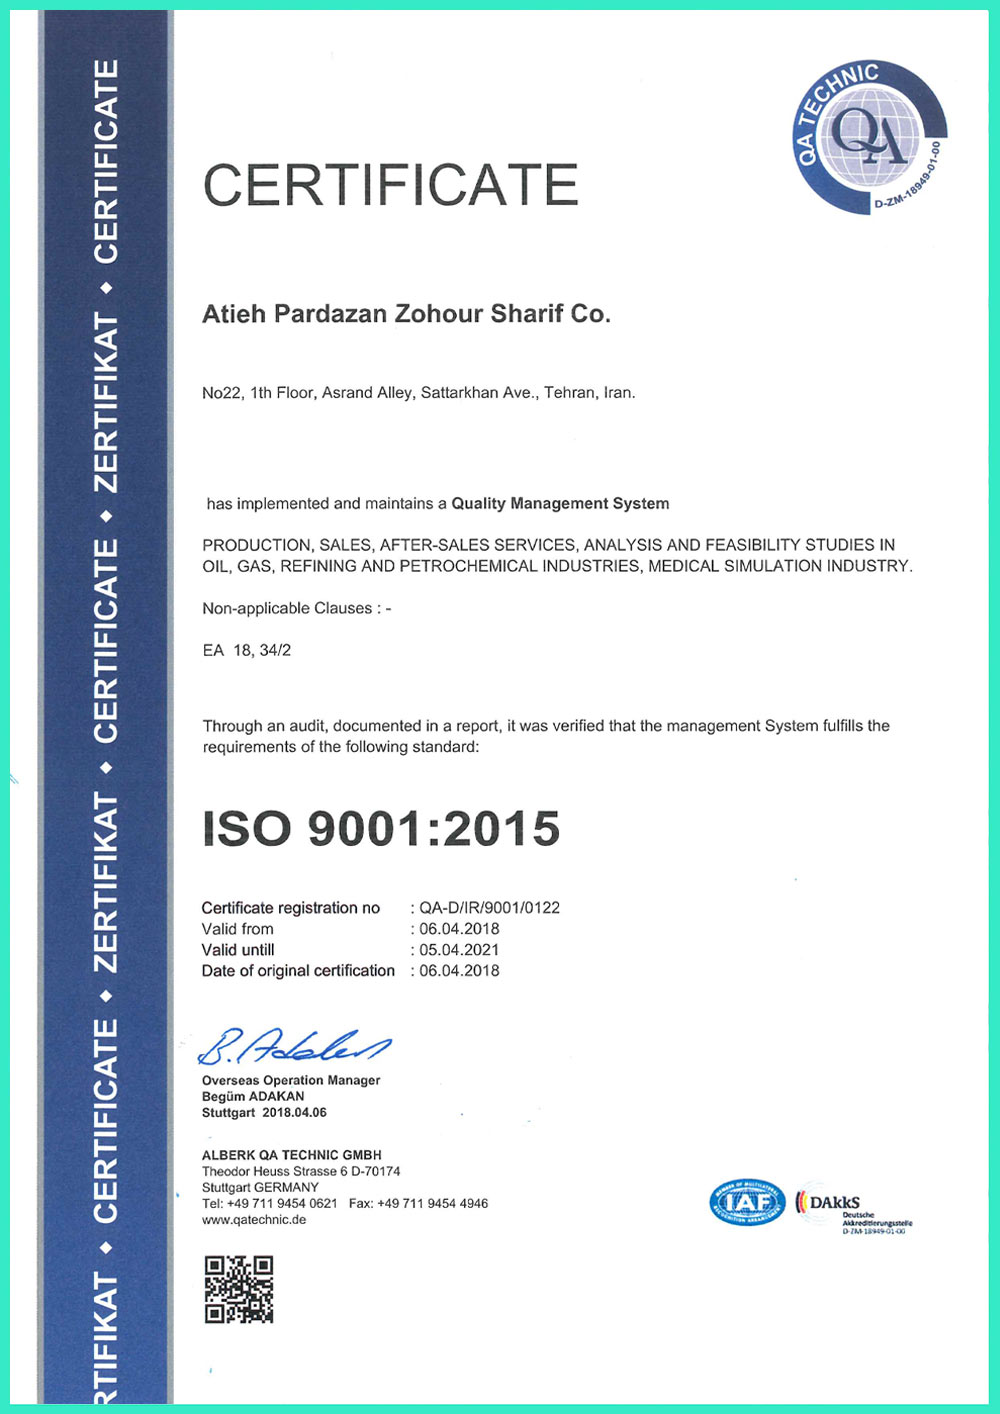 Iso-9001-2015